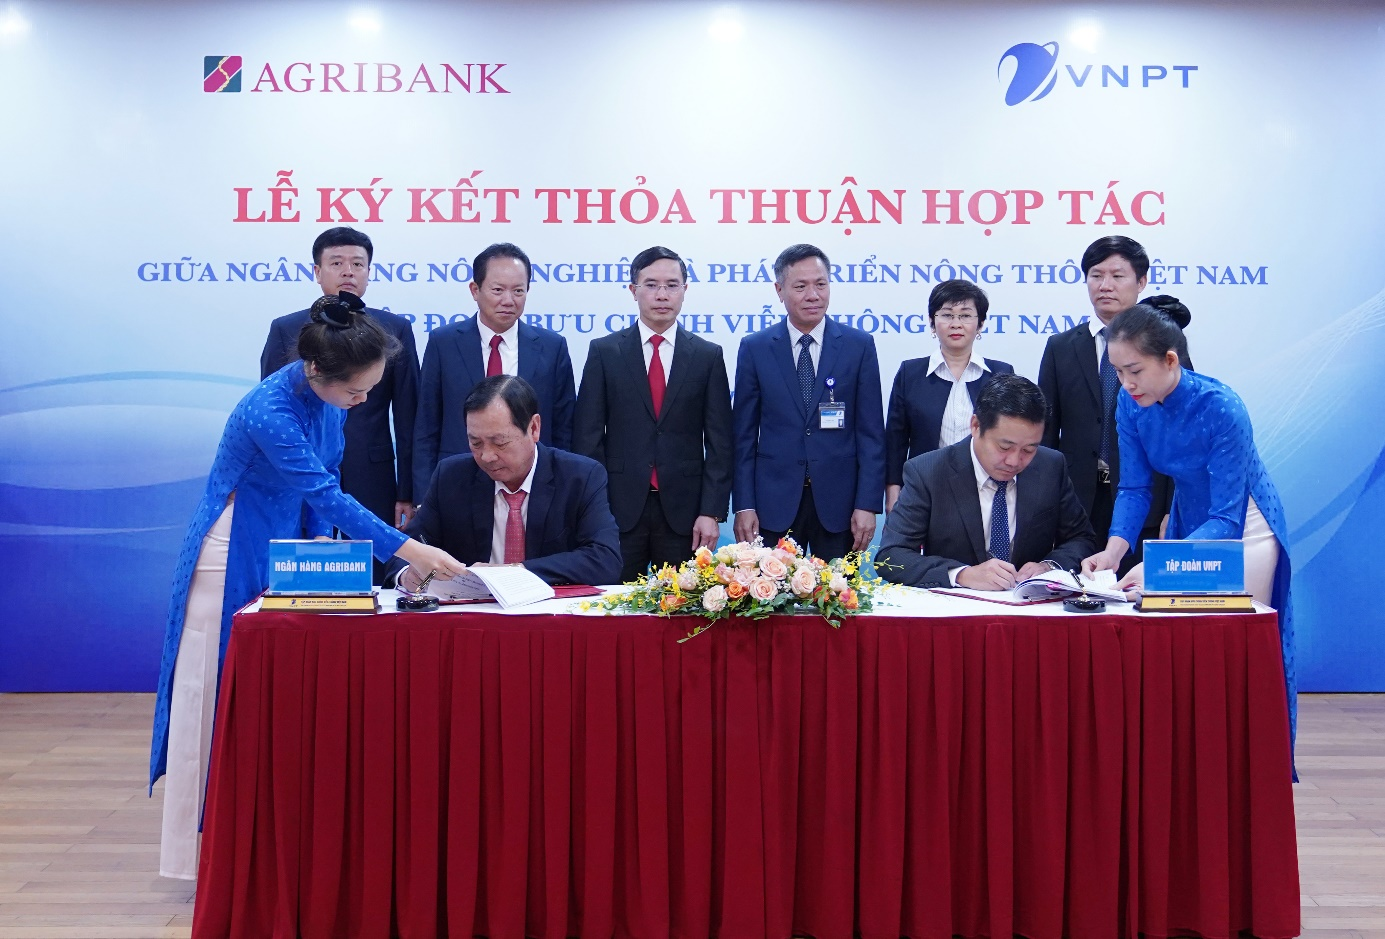 VNPT Group and Agribank sign a comprehensive cooperation agreement